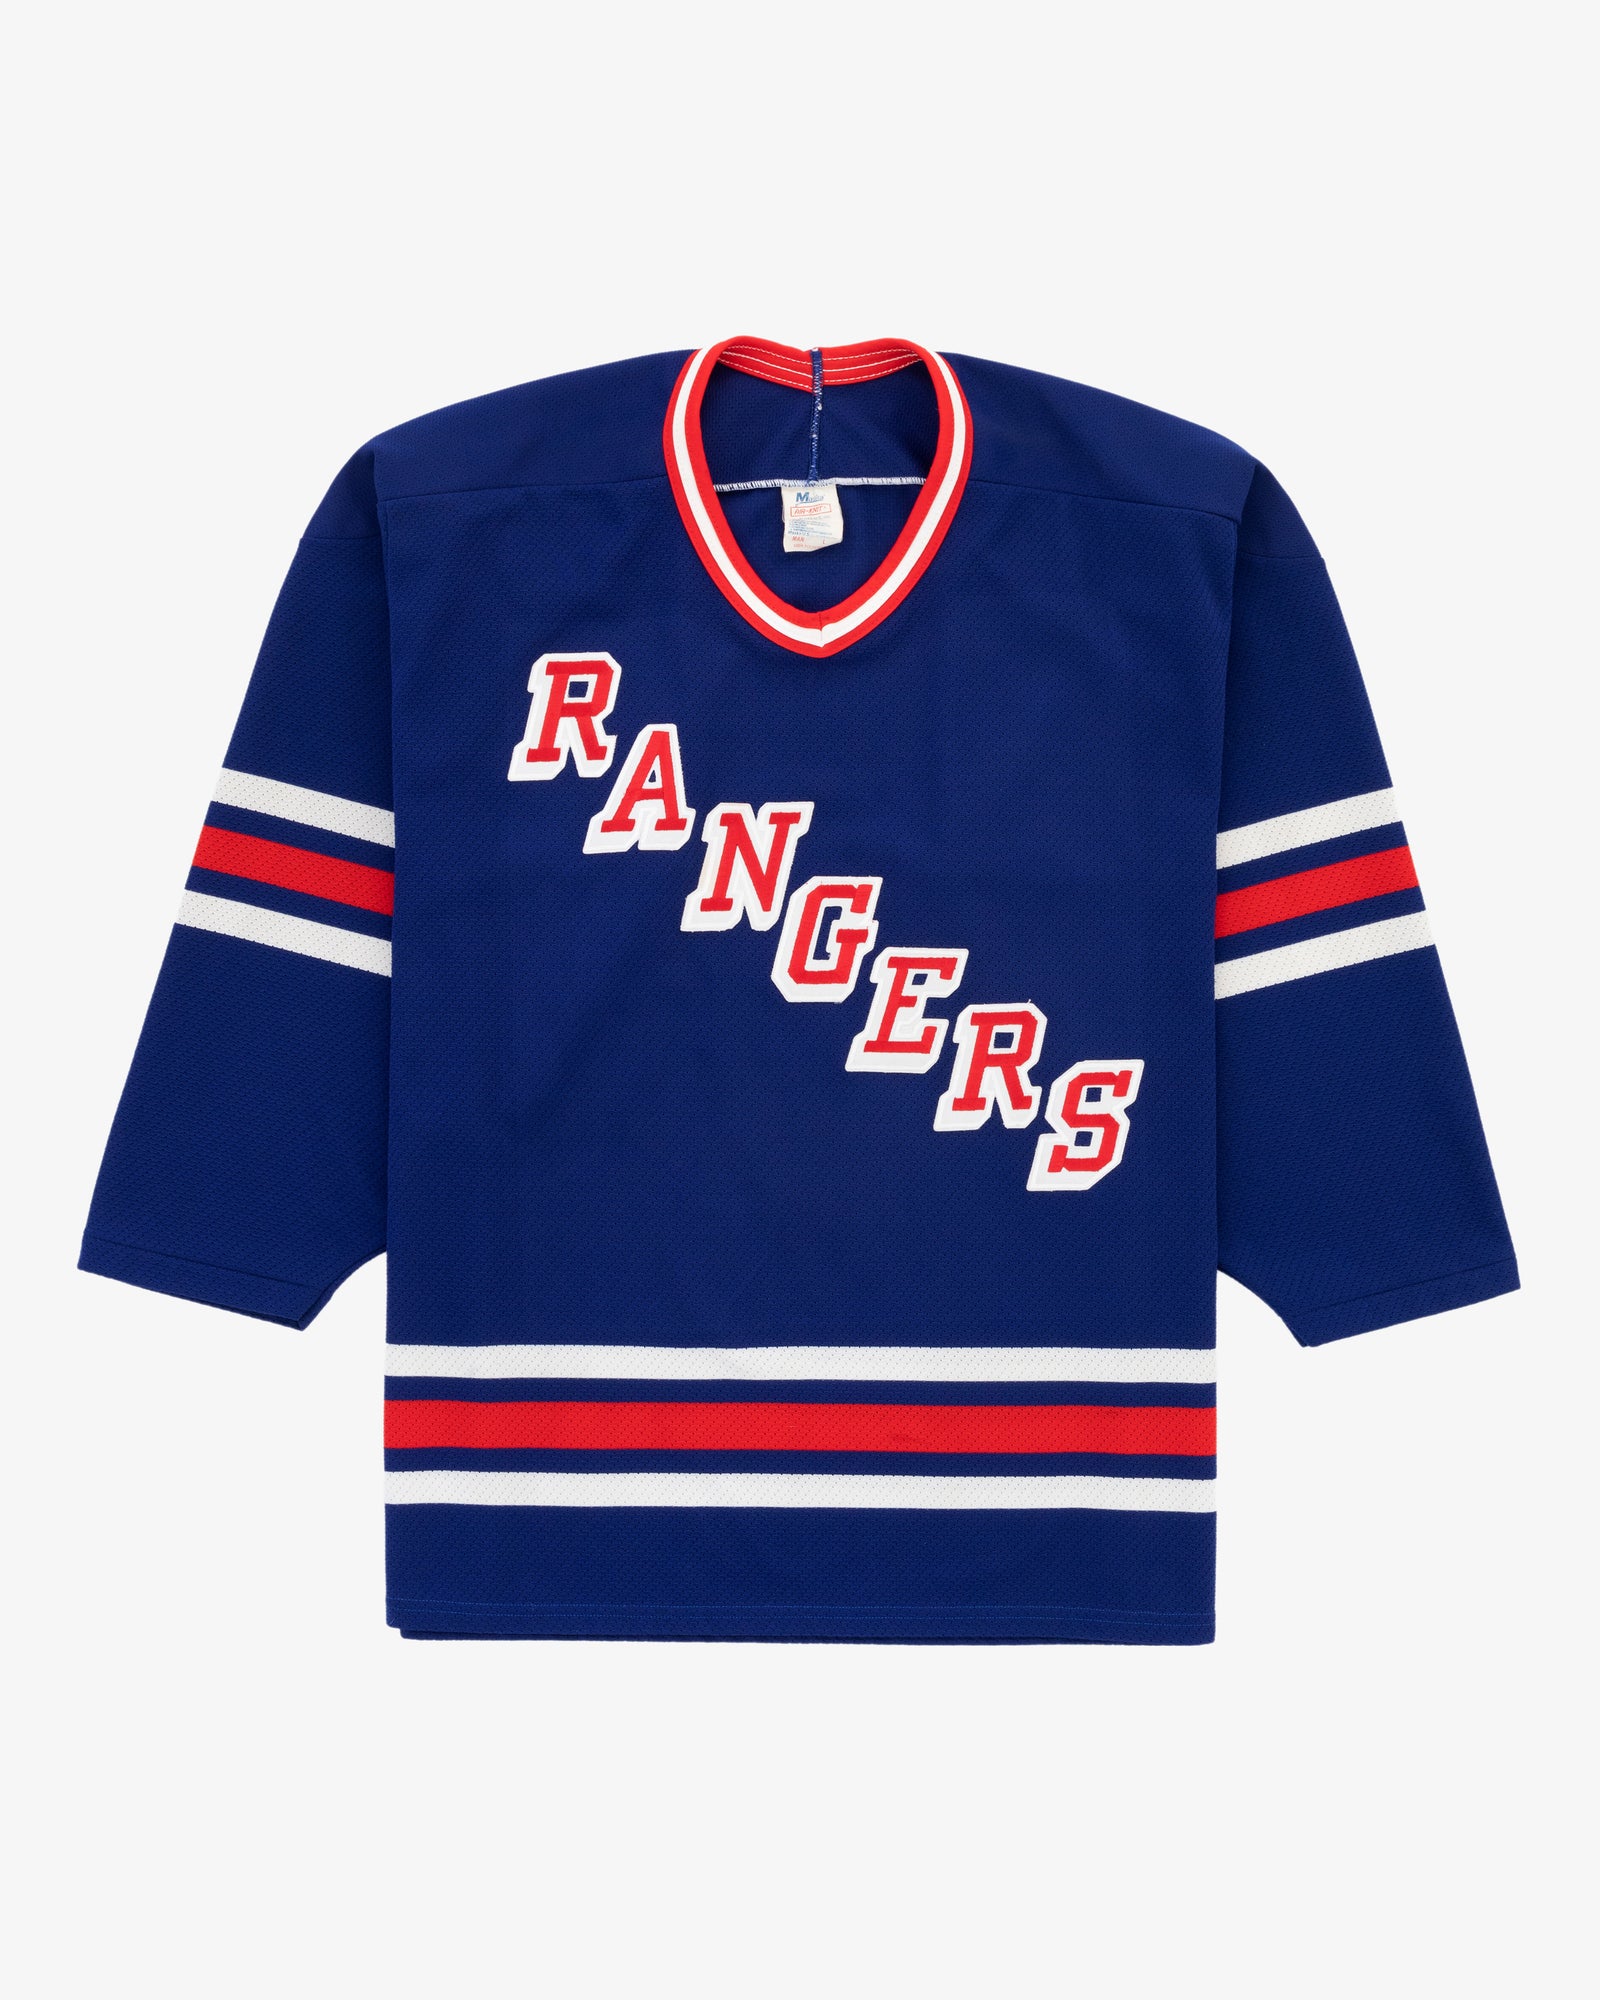 The New York Rangers considered some truly silly 90s jersey designs 